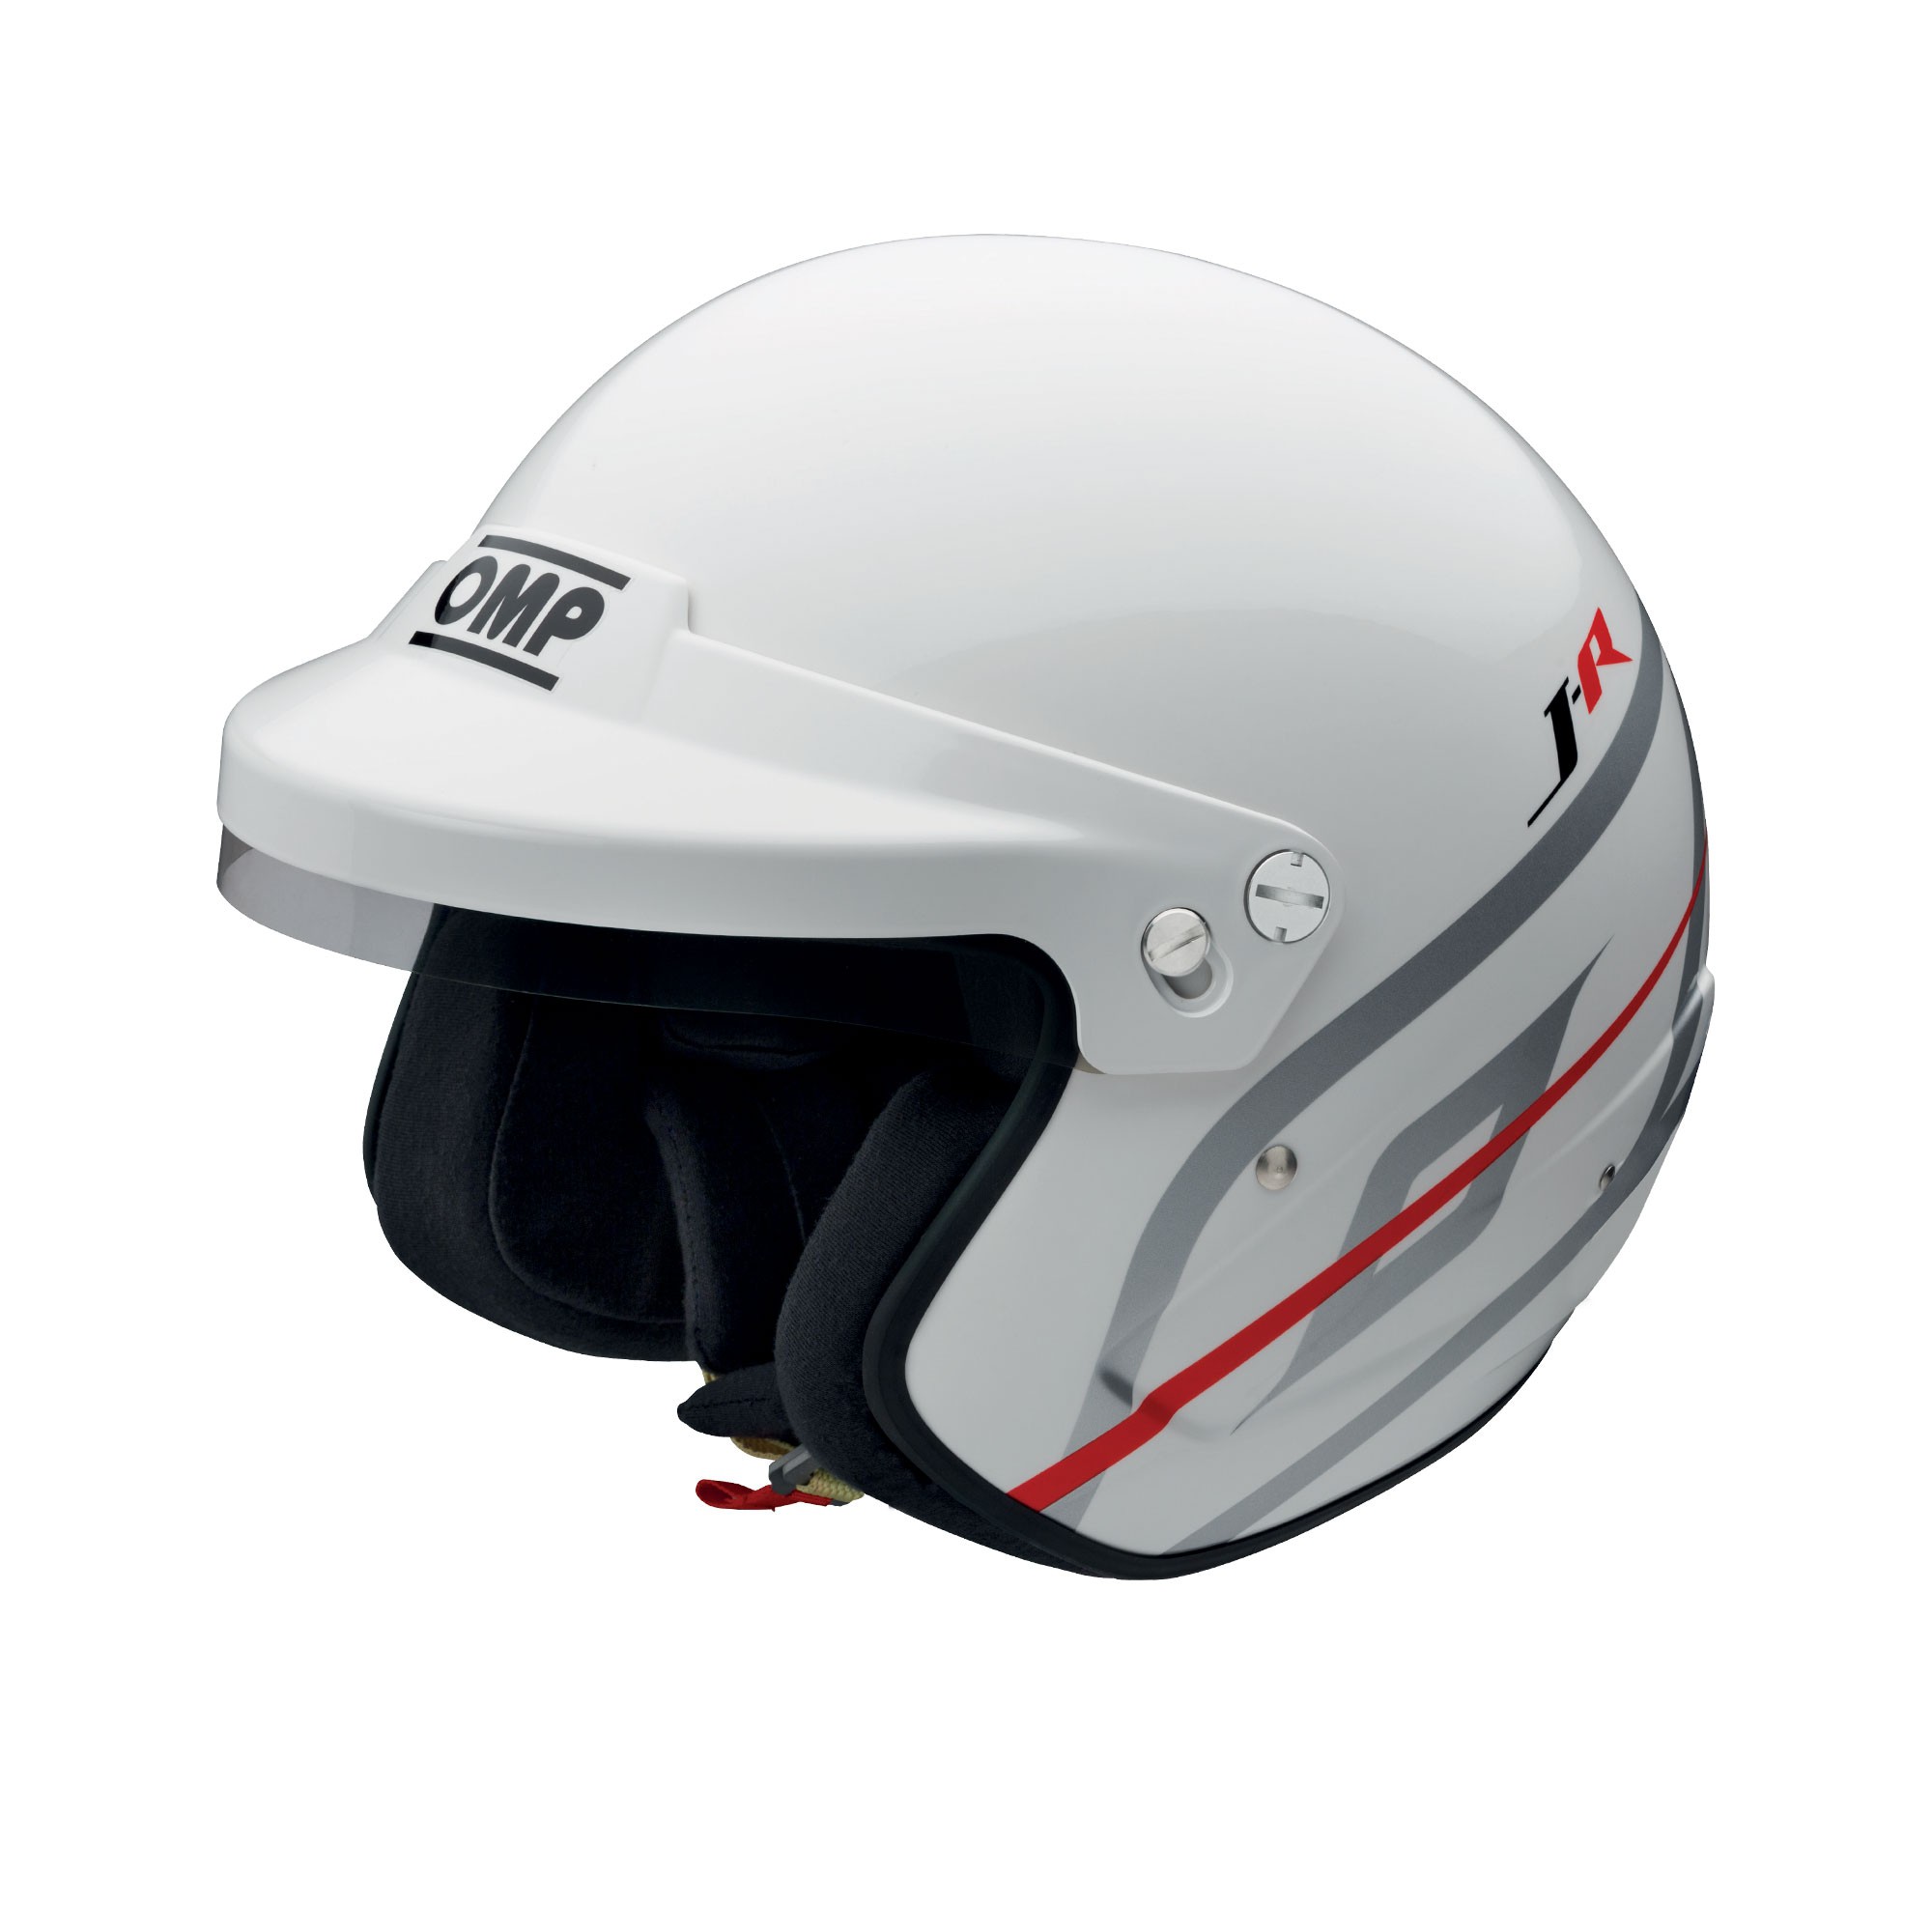 FIA Approved Helmet 'SR-1' Race Lid Oval/Rally SA2015 White or Black XS to XL 